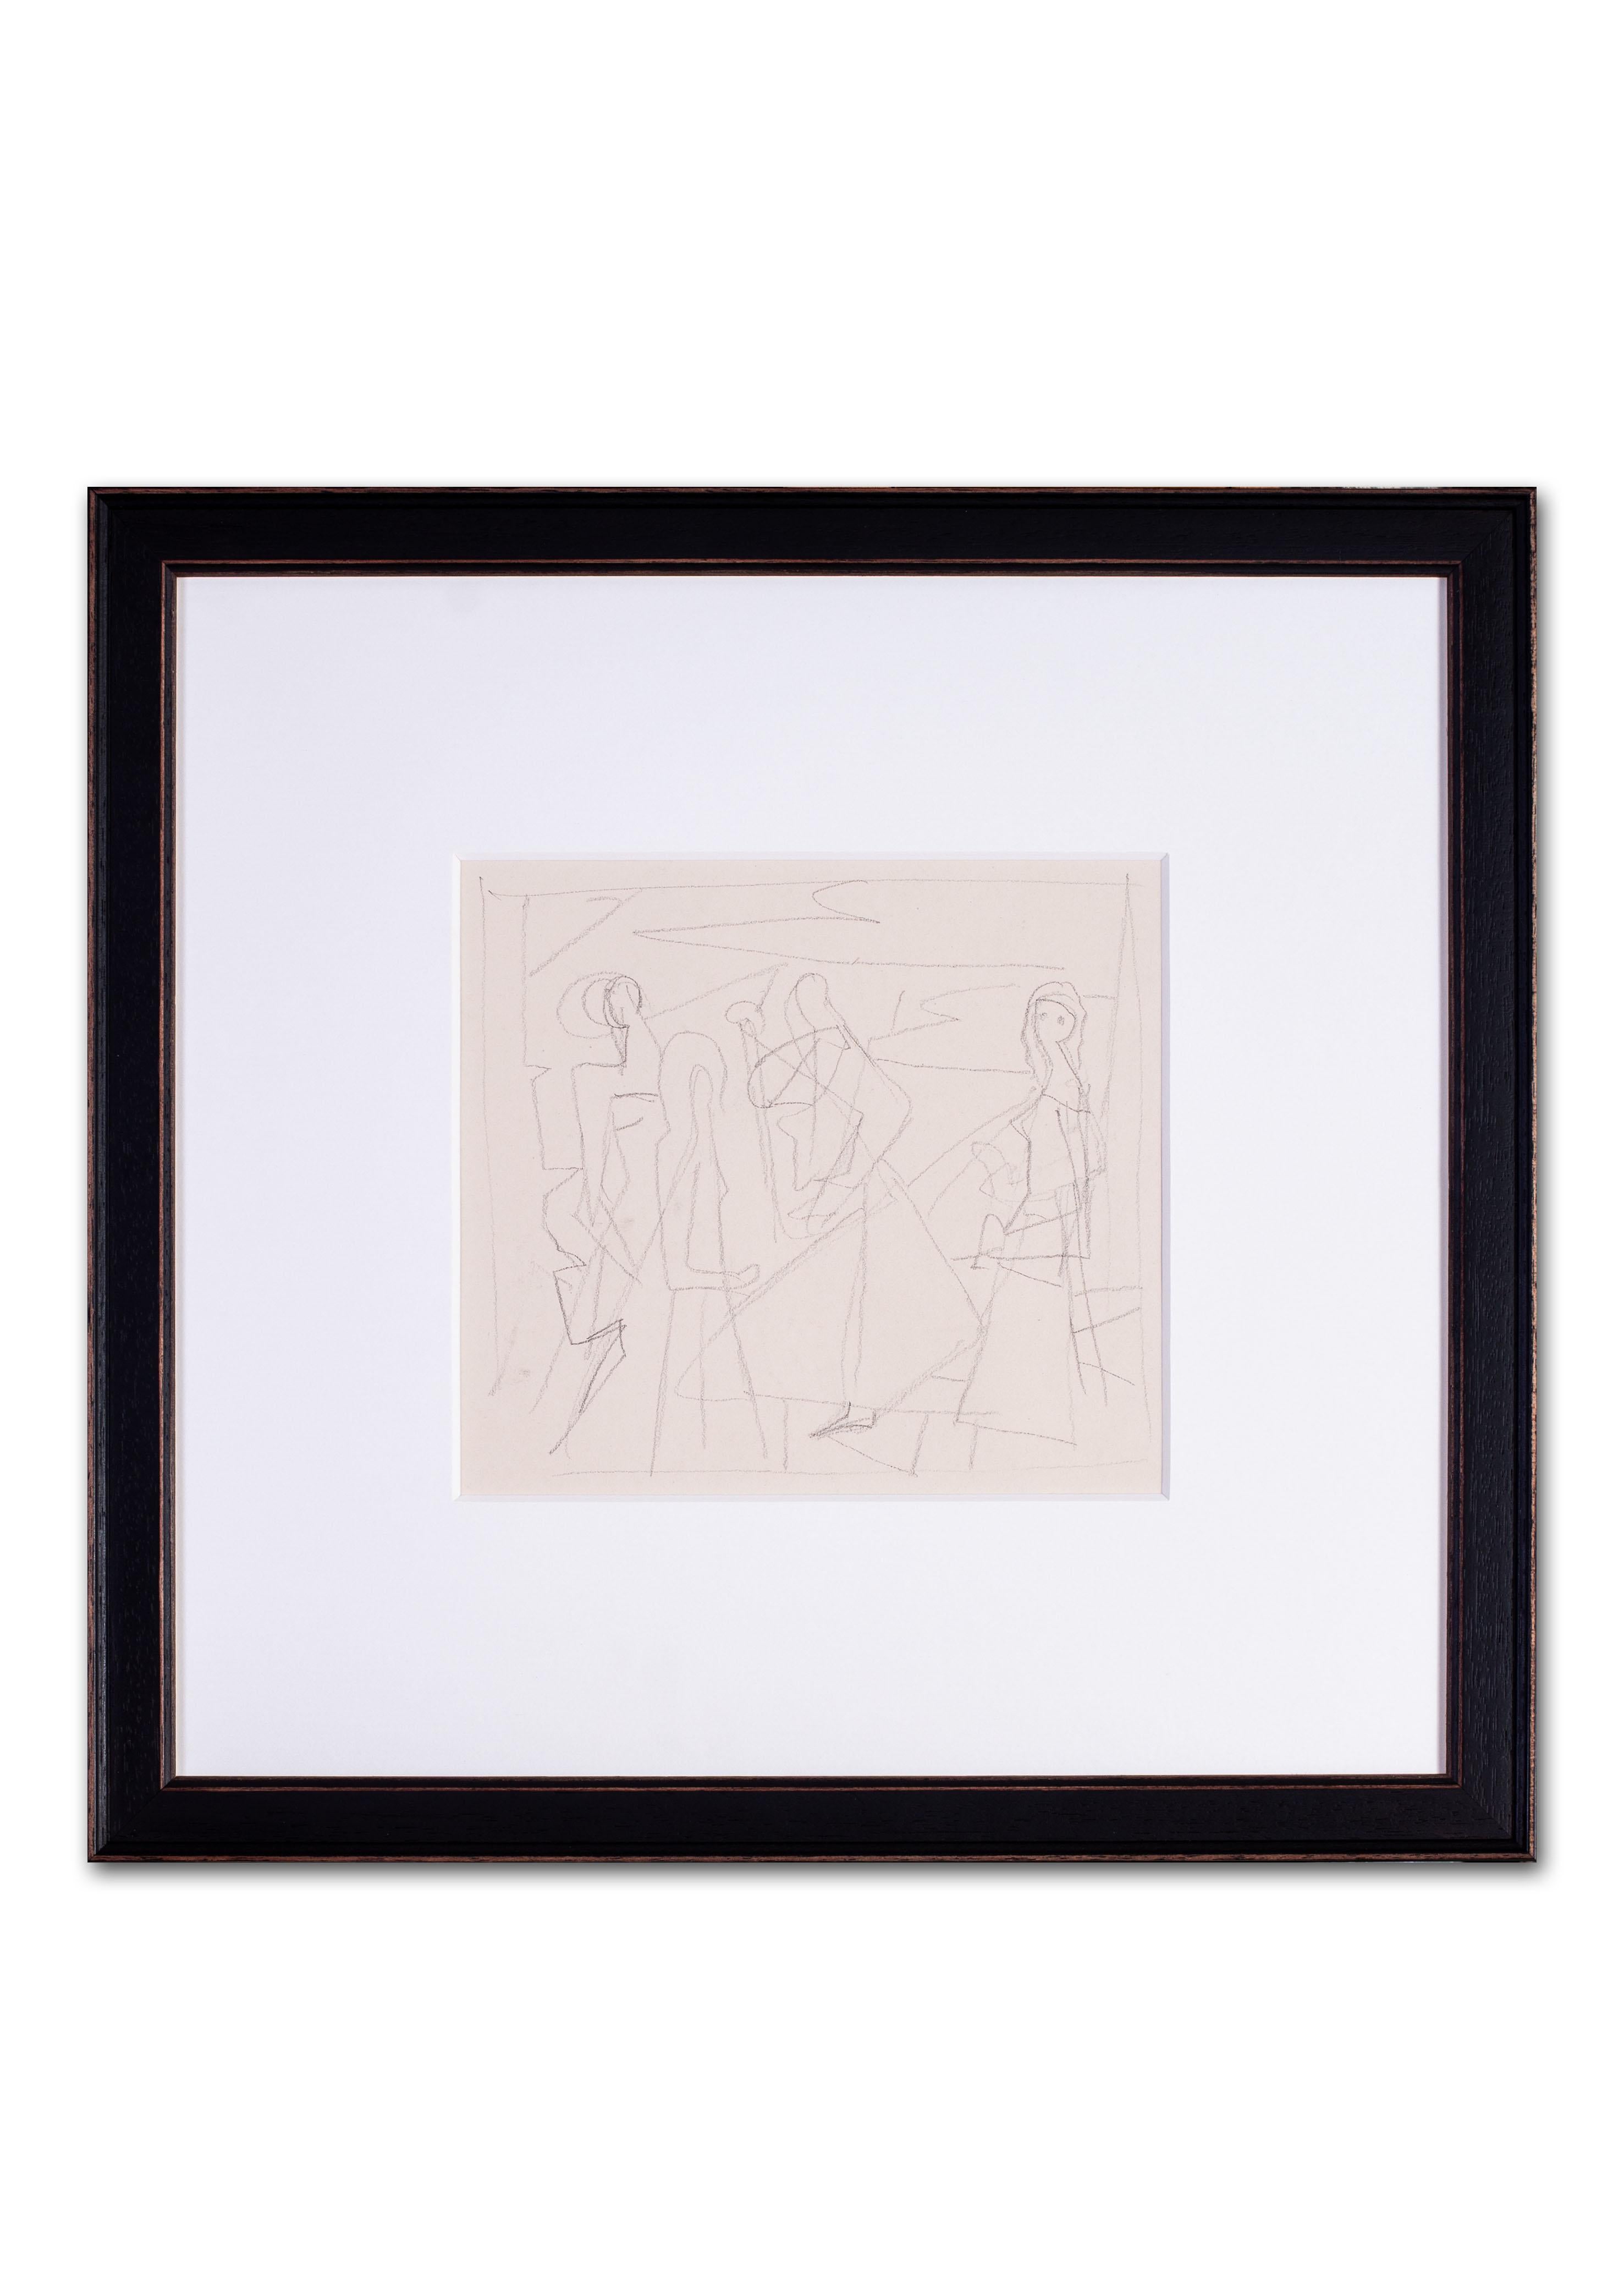 German Expressionist drawing of abstracted figures by Carl Hofer For Sale 3